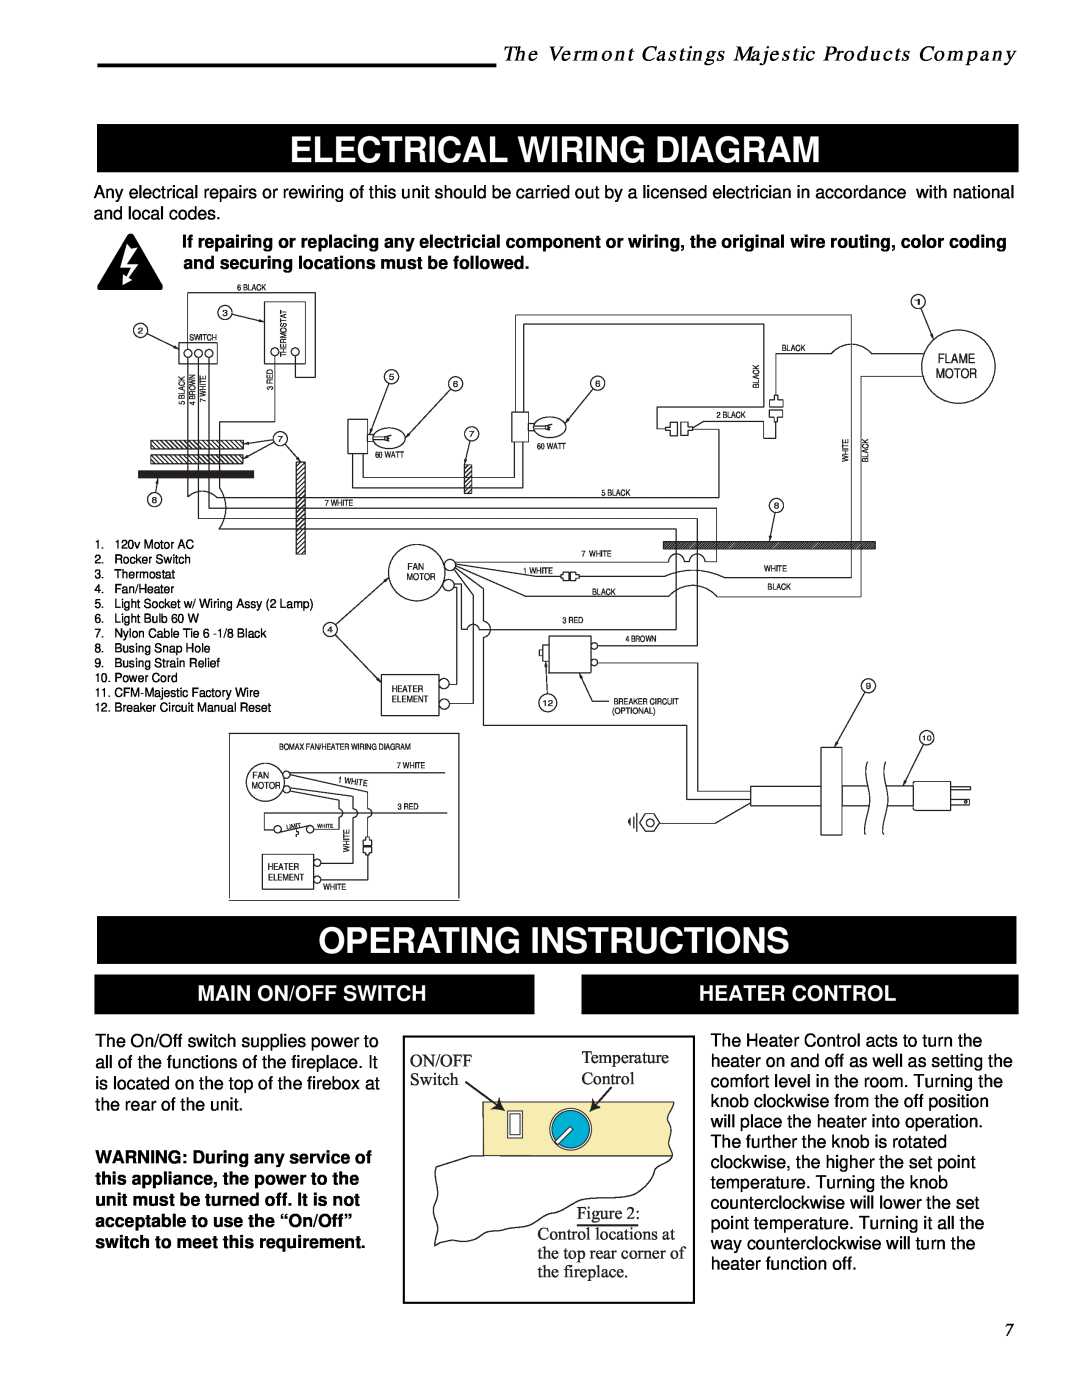 Vermont Casting ACSG Electrical Wiring Diagram, Operating Instructions, The Vermont Castings Majestic Products Company 